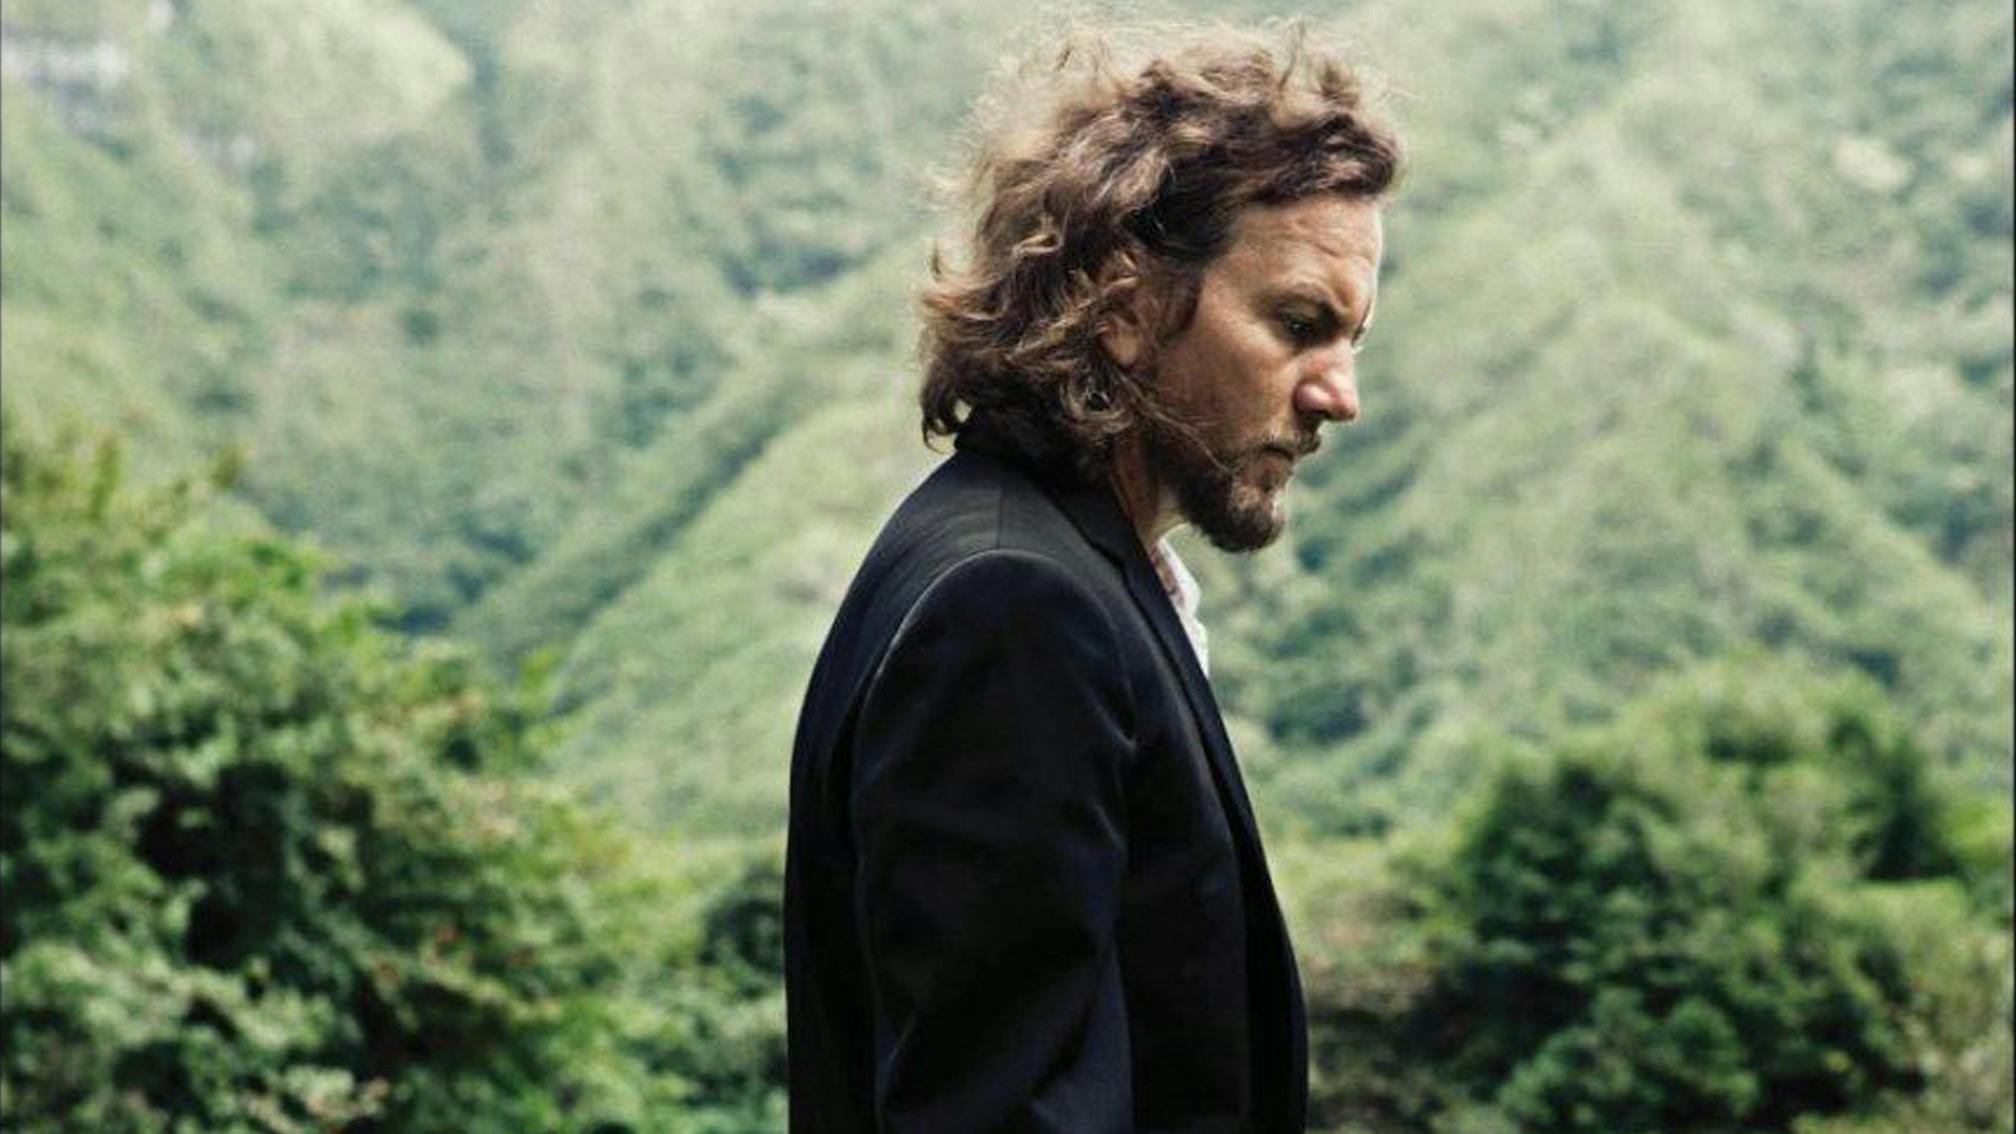 Listen To Pearl Jam Frontman Eddie Vedder's New Solo Song, Cartography